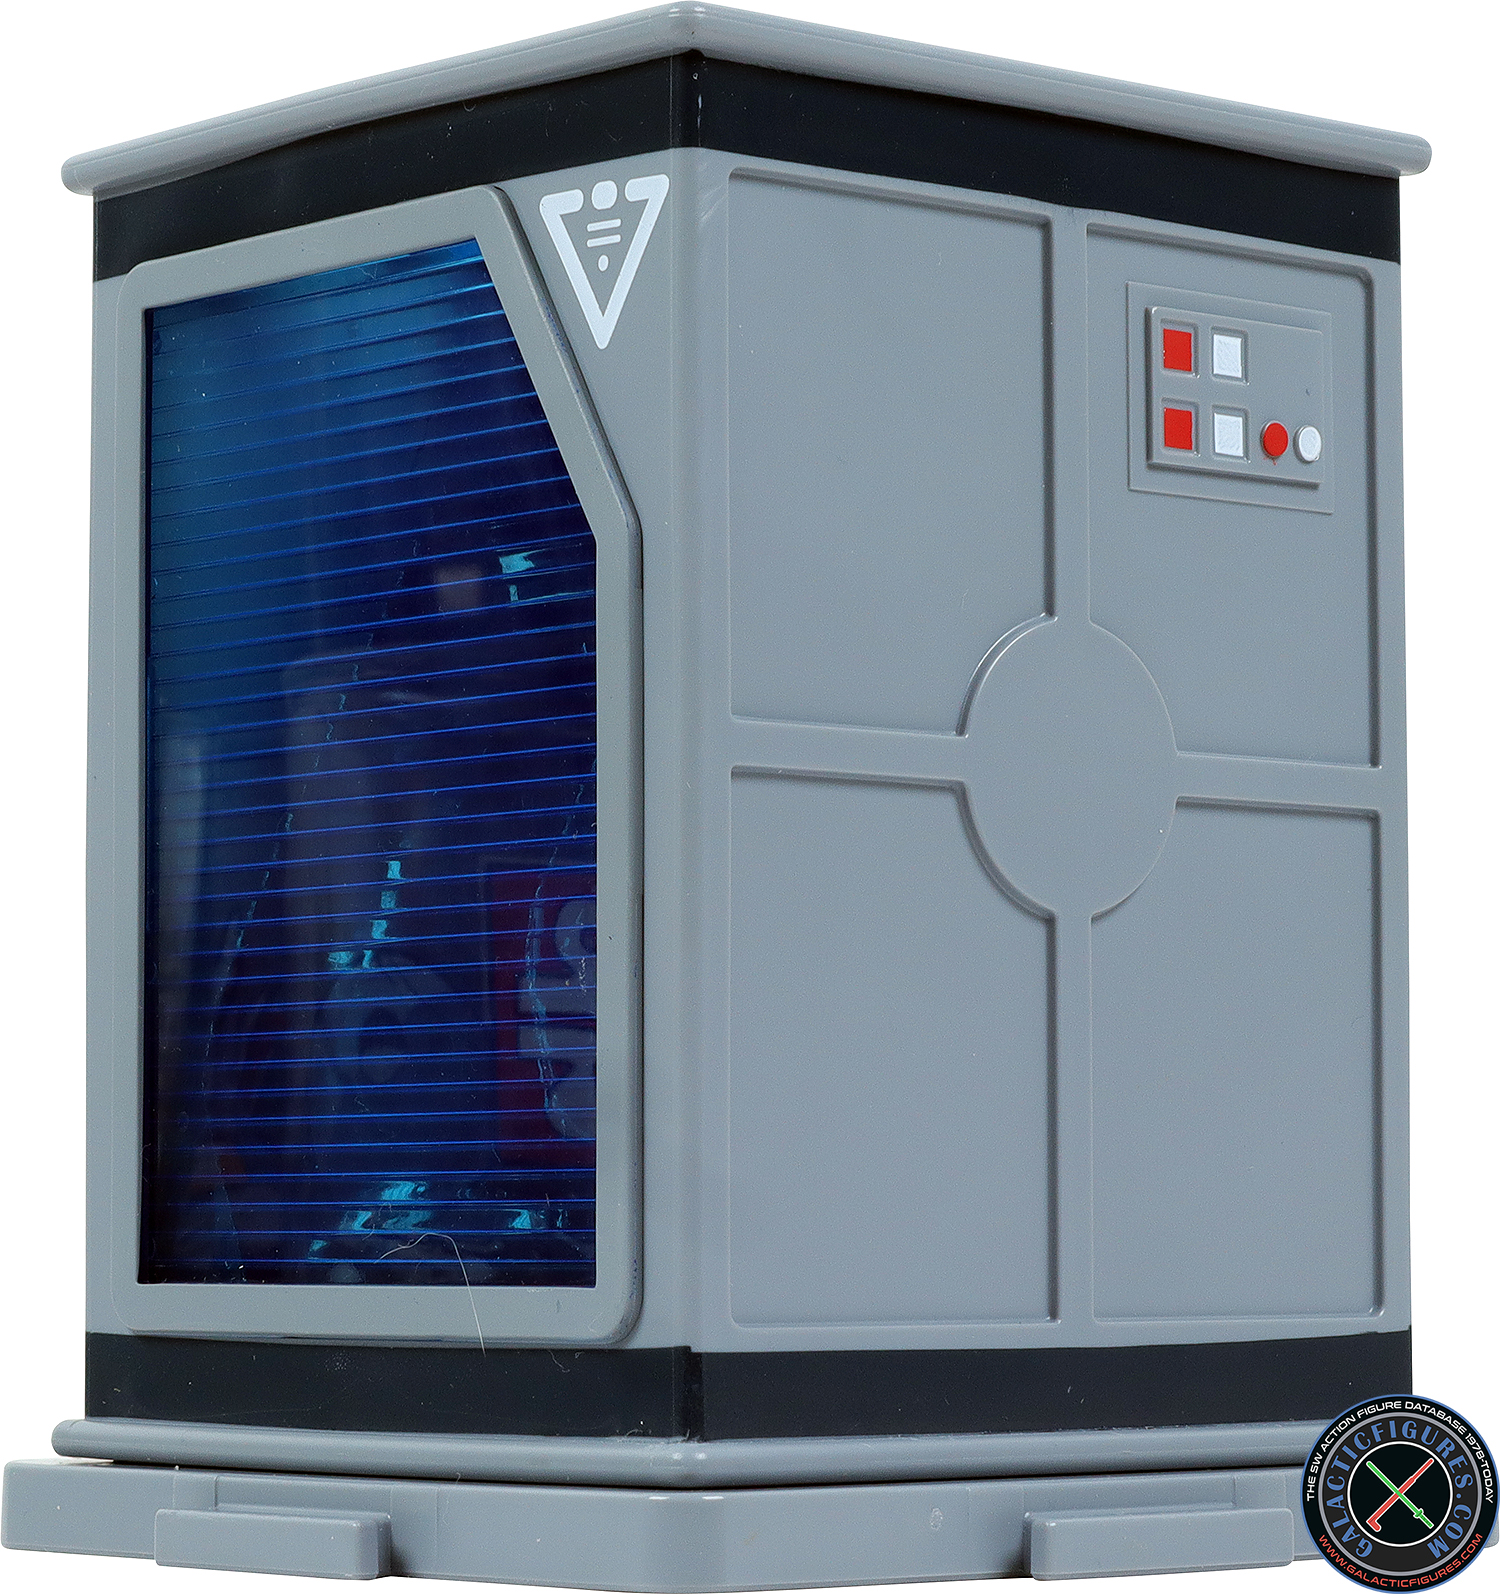 B5-SL Droid Factory Mystery Crate 2021